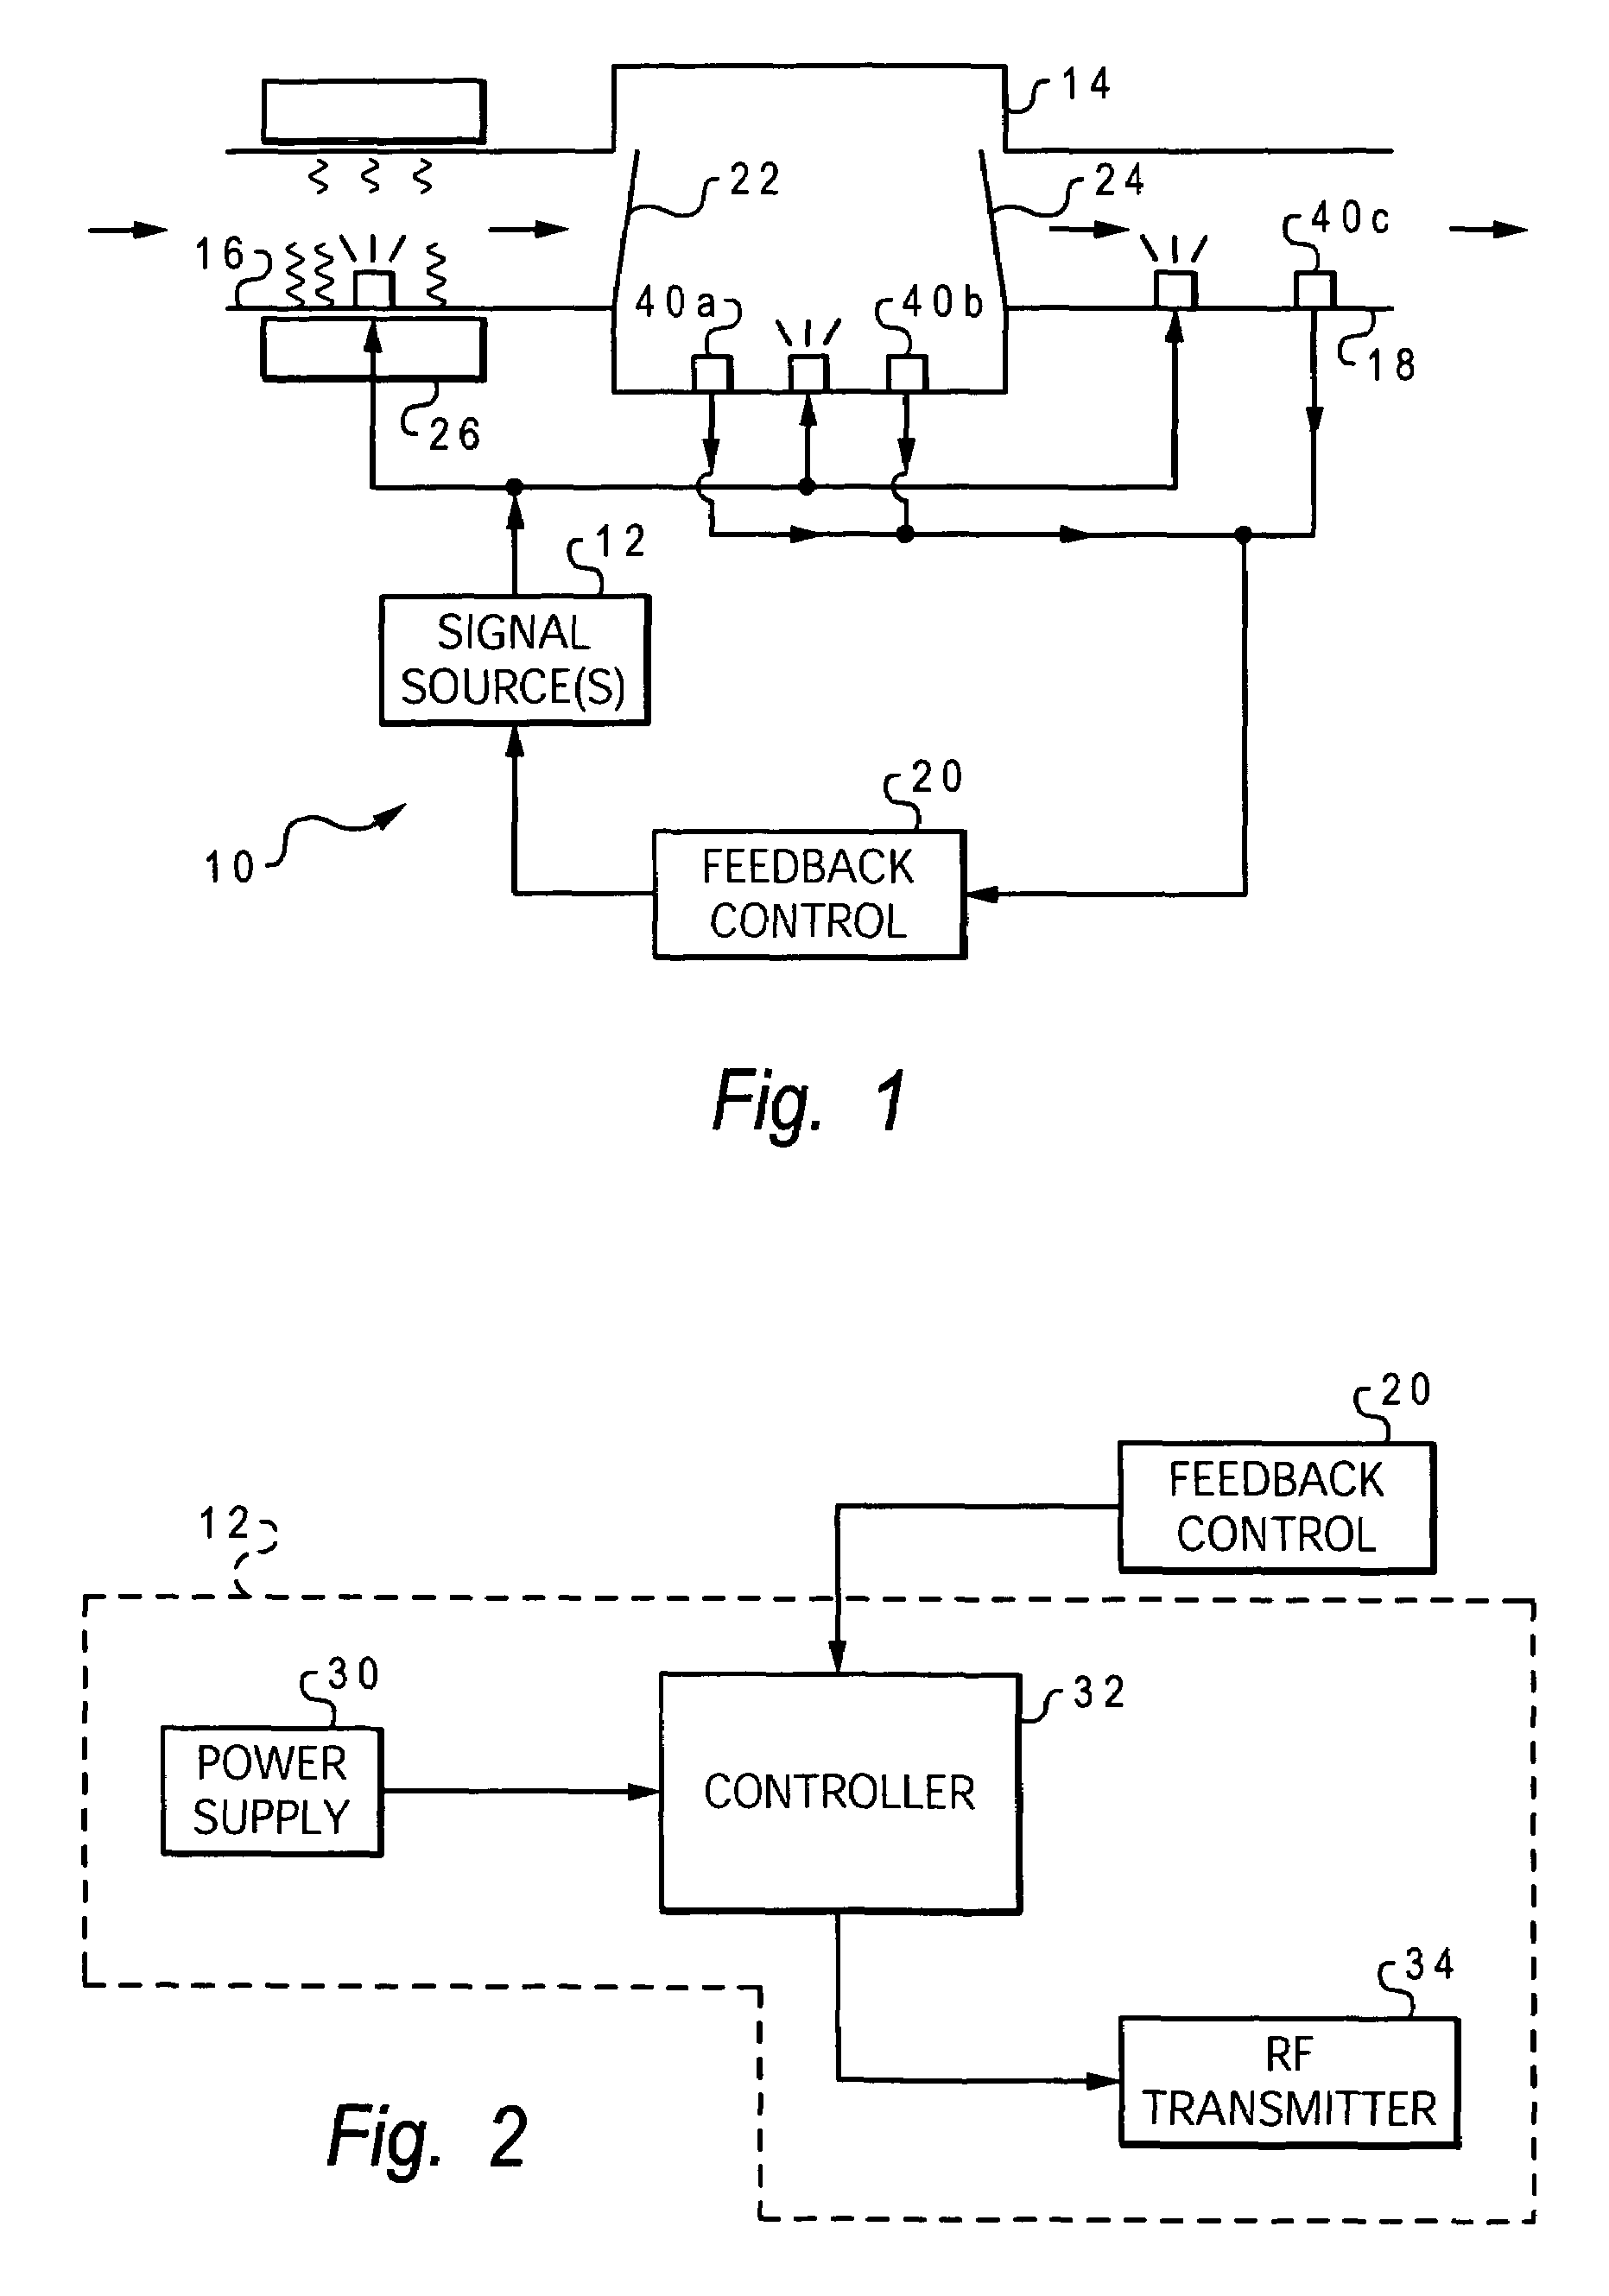 Nuclear resonance applications for enhanced combustion